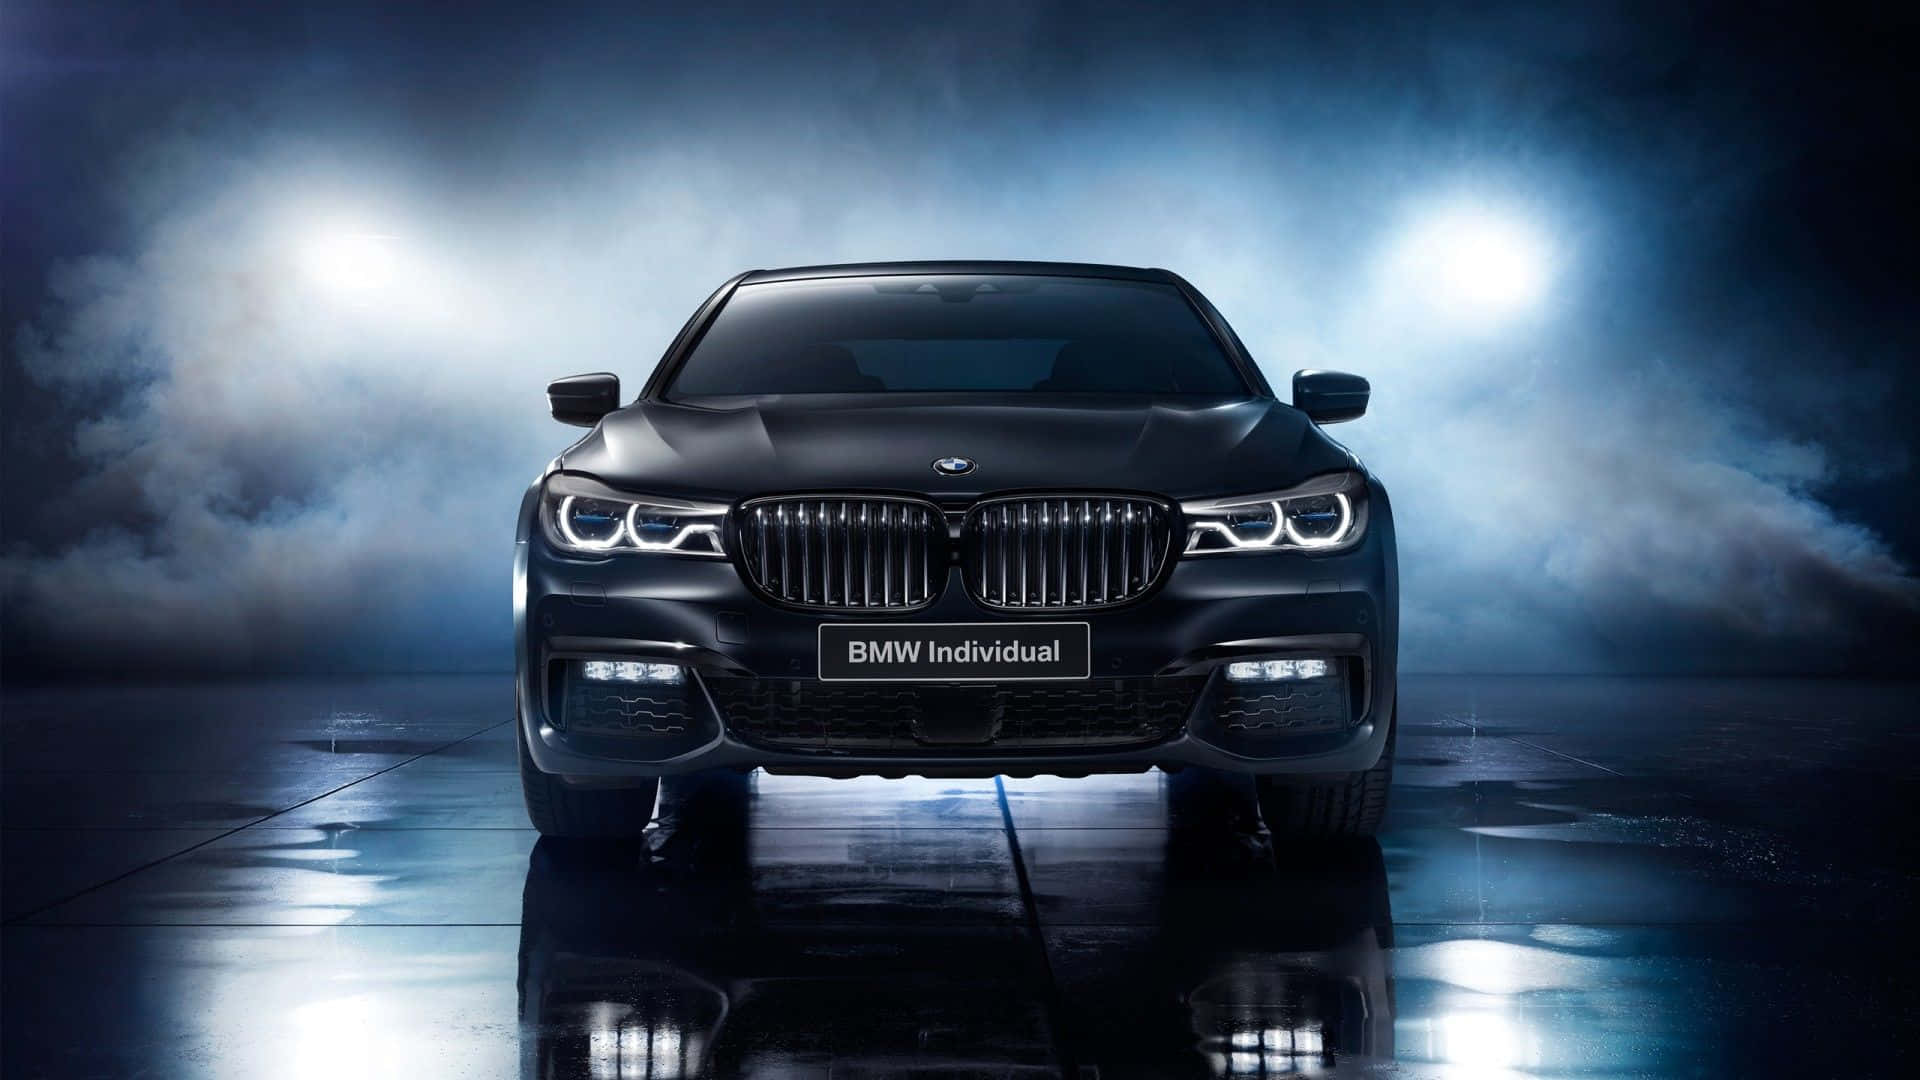 Sleek and Stylish BMW 7 Series in Vibrant City Setting Wallpaper